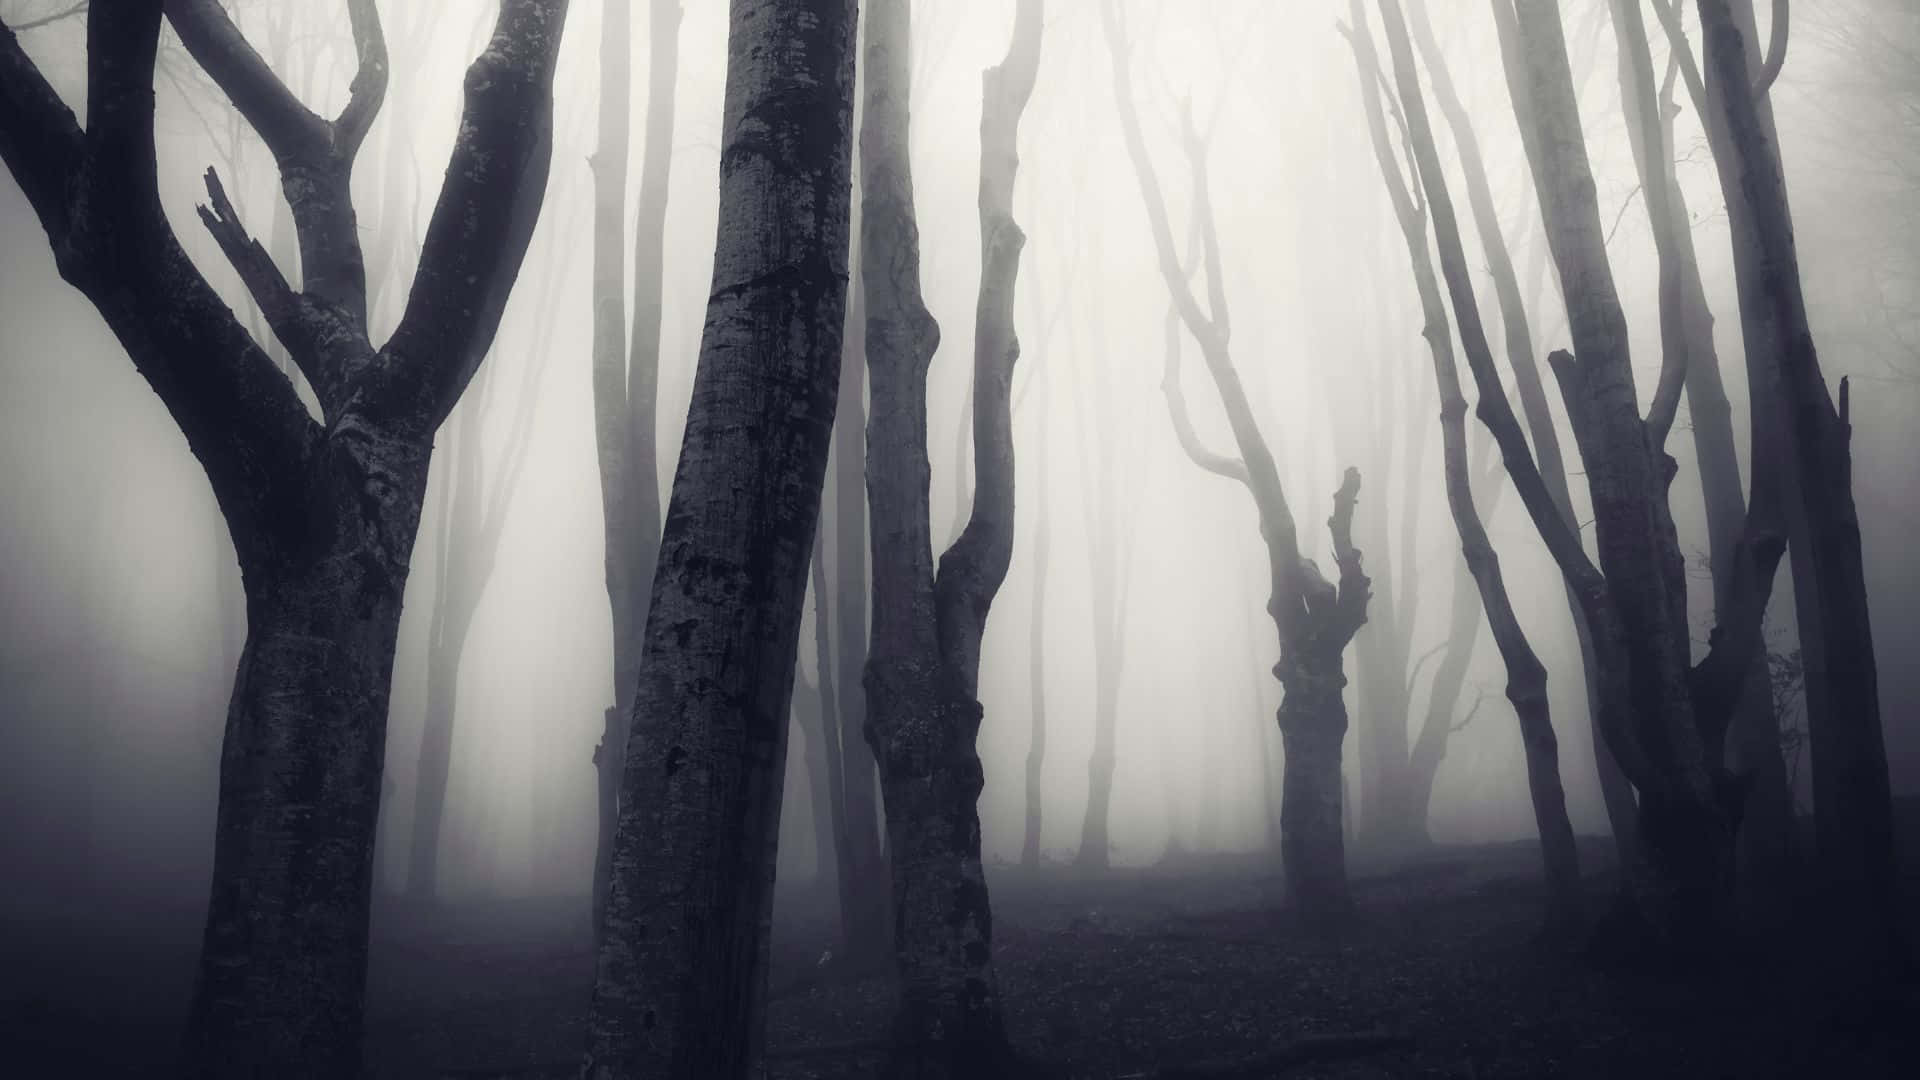 "The dark shadows of a haunted forest glisten in the moonlight." Wallpaper